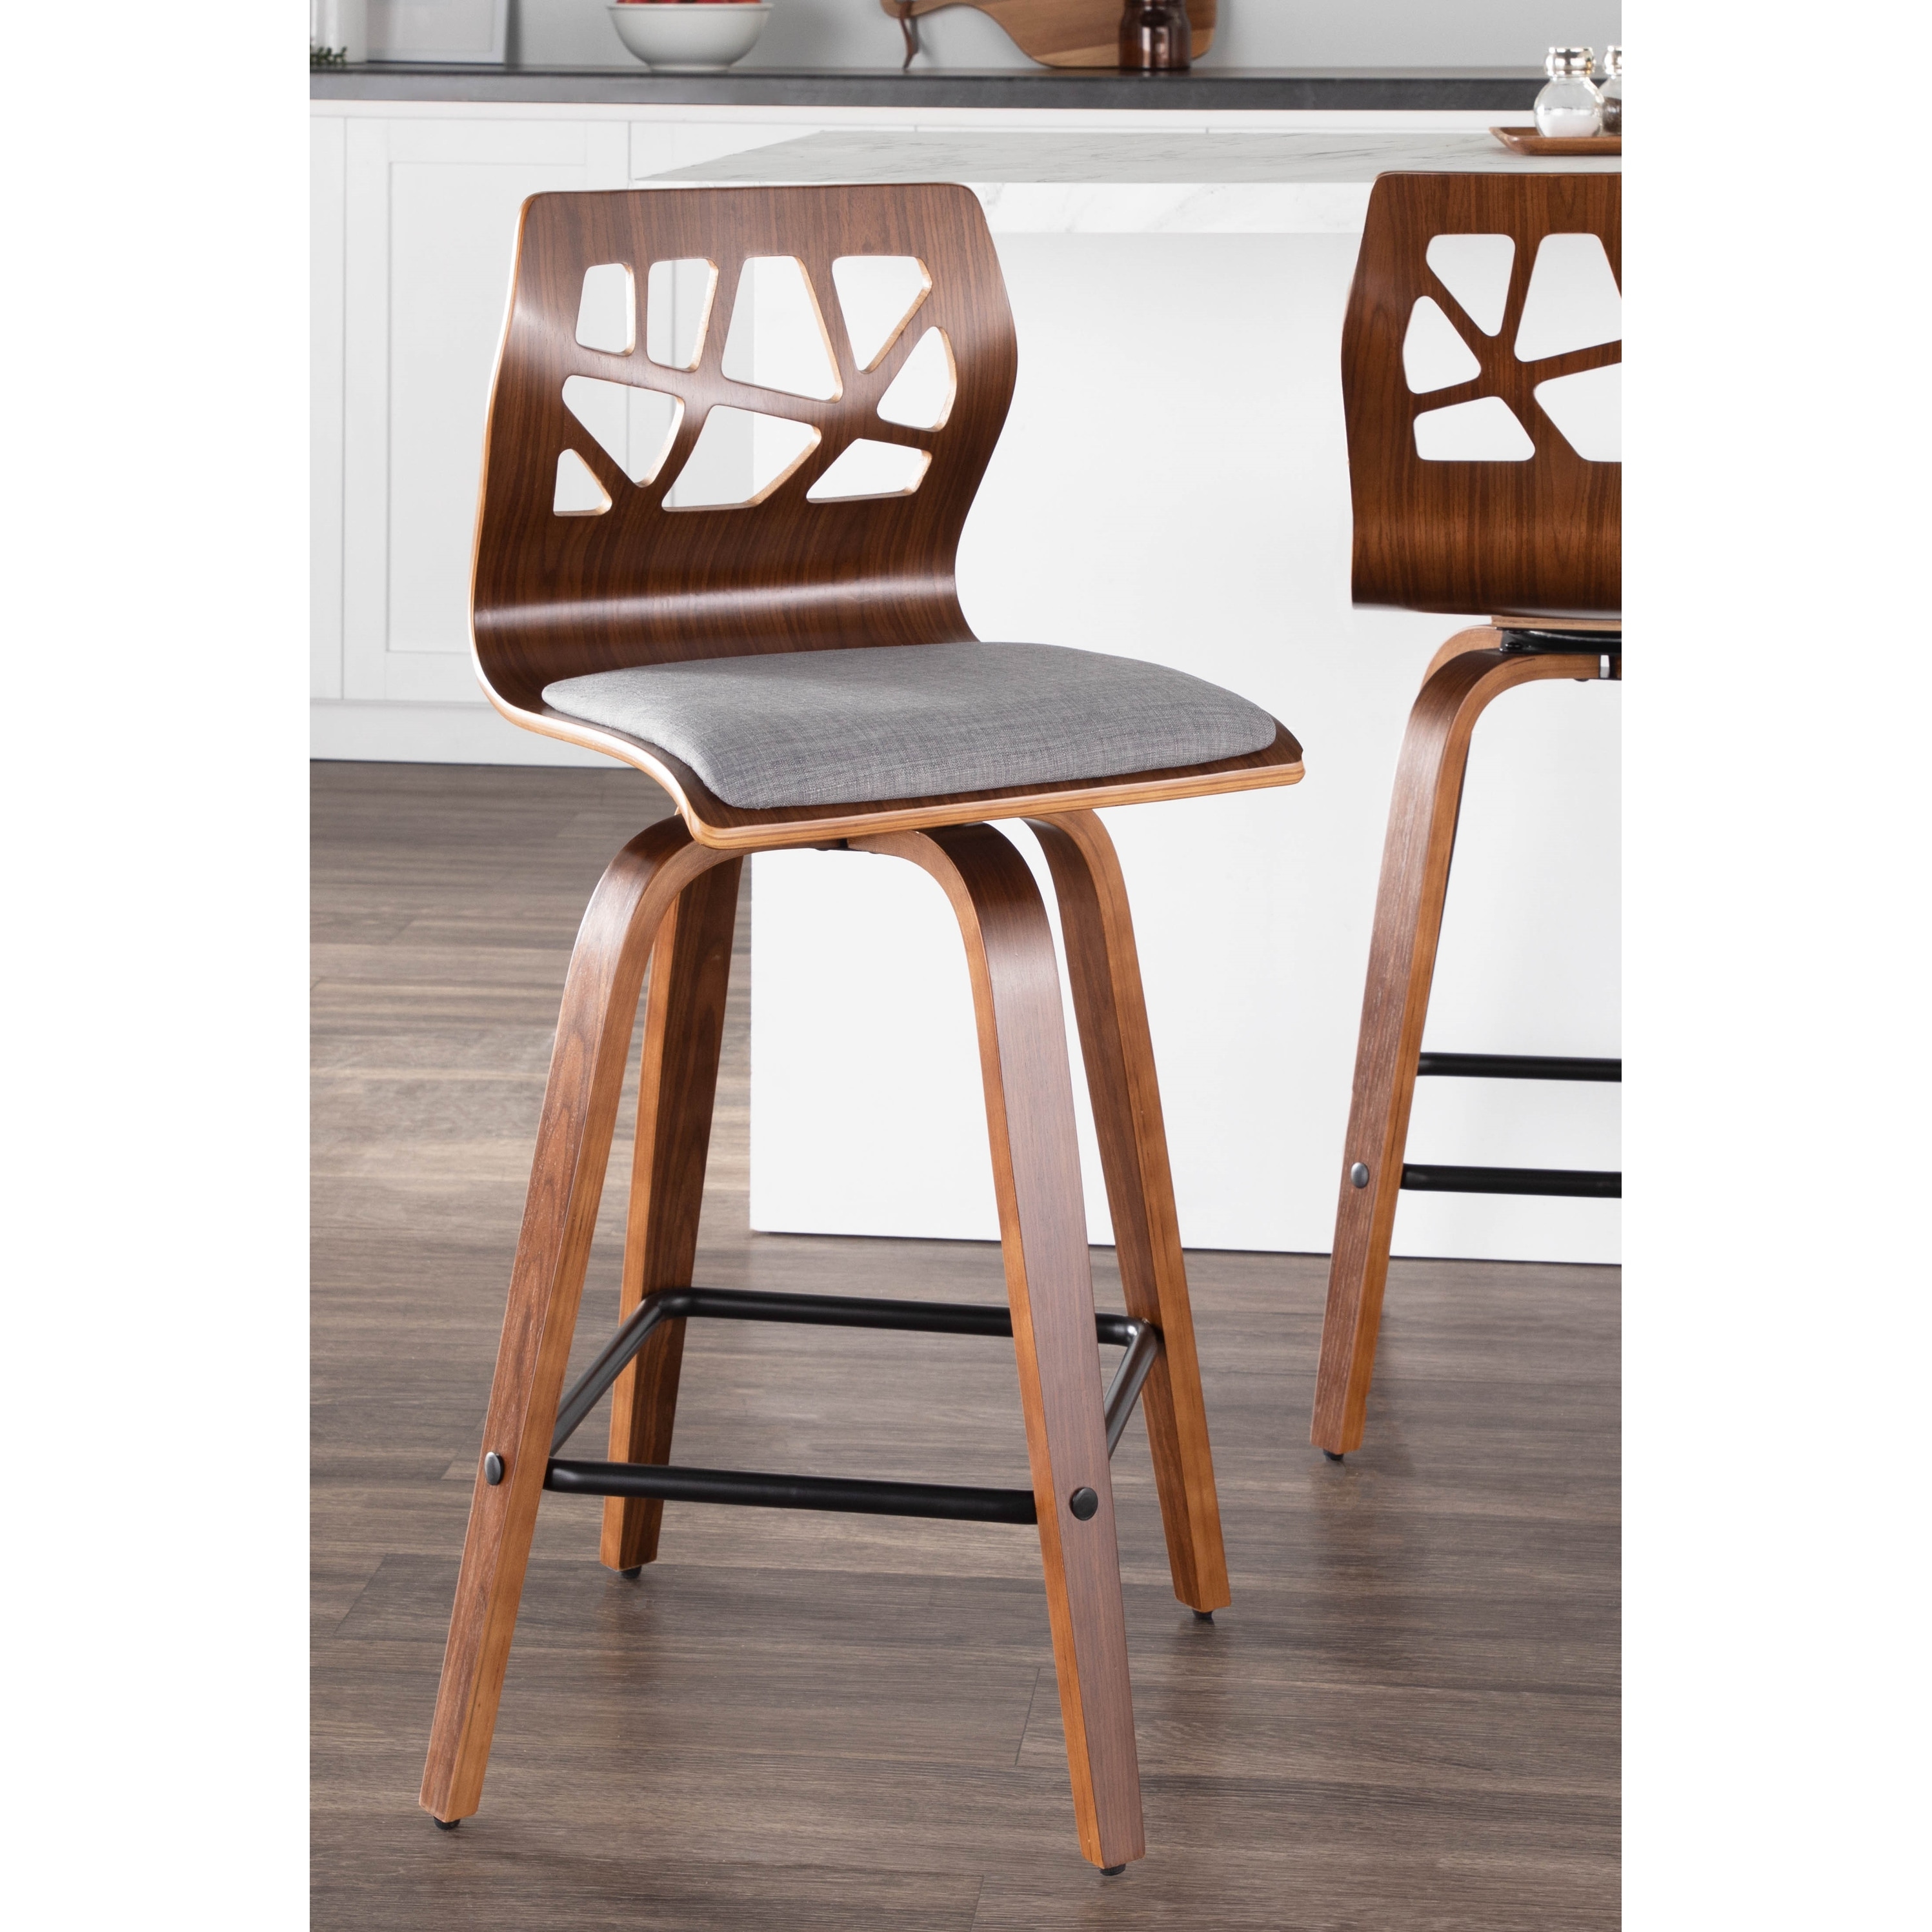 Carson Carrington Sala 26 inch Counter Stools with Bent Wood Legs and Black Square Footrest (Set of 2)